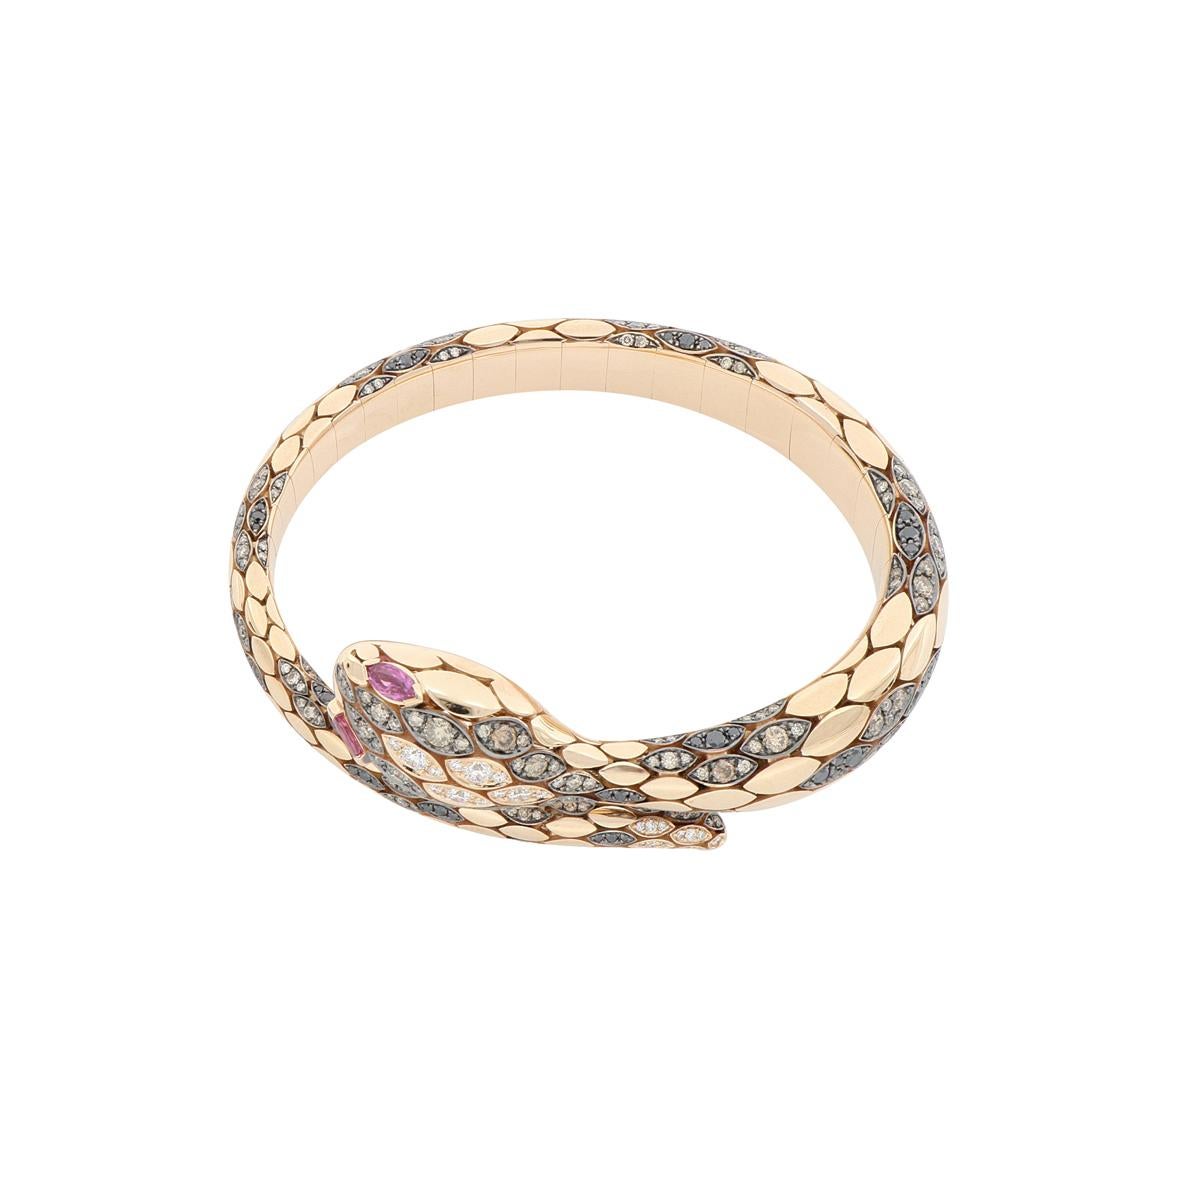 This stunning fashion snake bracelet with white and black diamonds is fit for women with a strong personality. Beautifully crafted in 18 Kt rose gold, this elegant bracelet is shaped in a diamond-pavé snake.

Snakes are powerful animals. Their